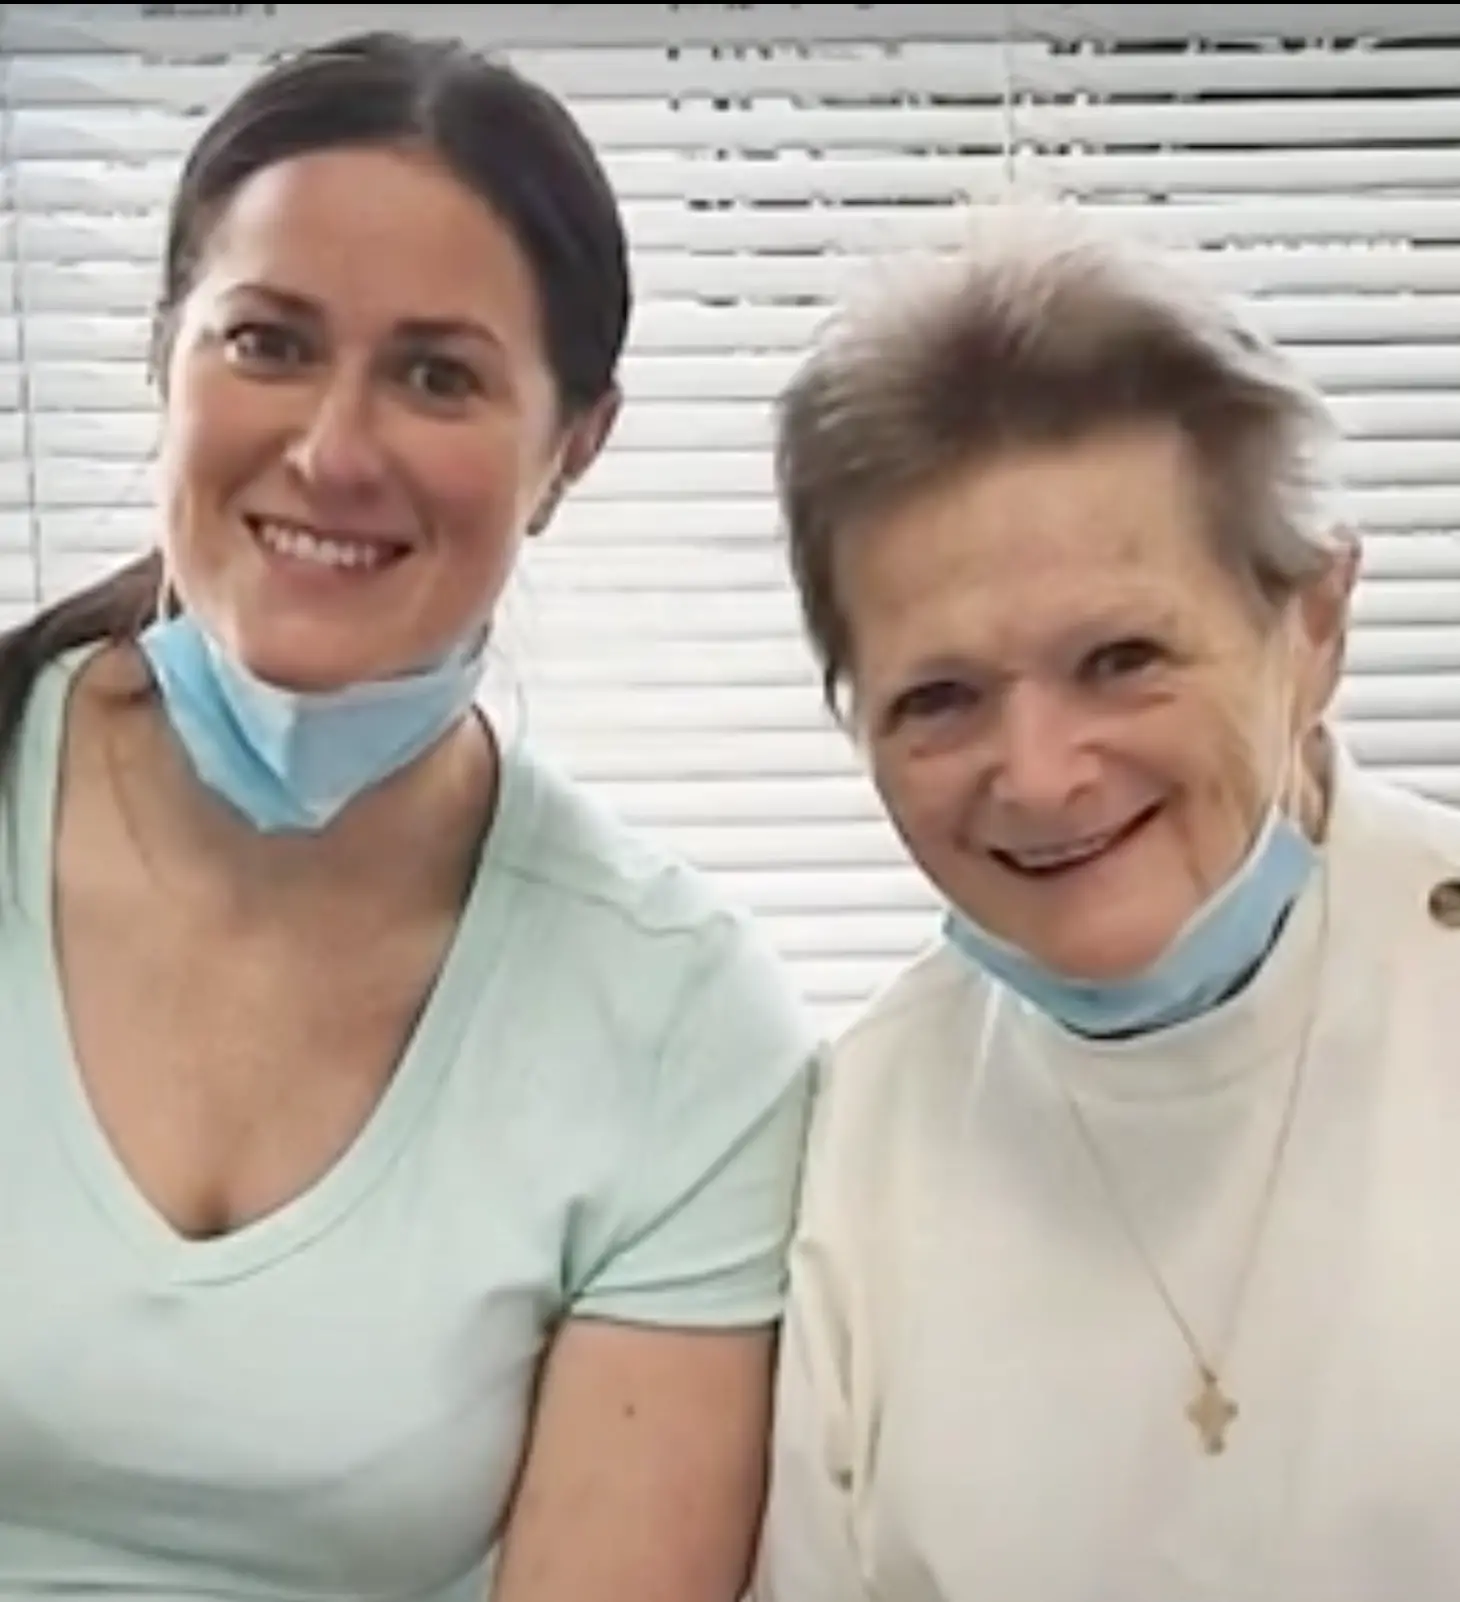 Eileen and Julia Harlin at the University of Maryland Medical Center in Baltimore | Source: YouTube/WBALTV11